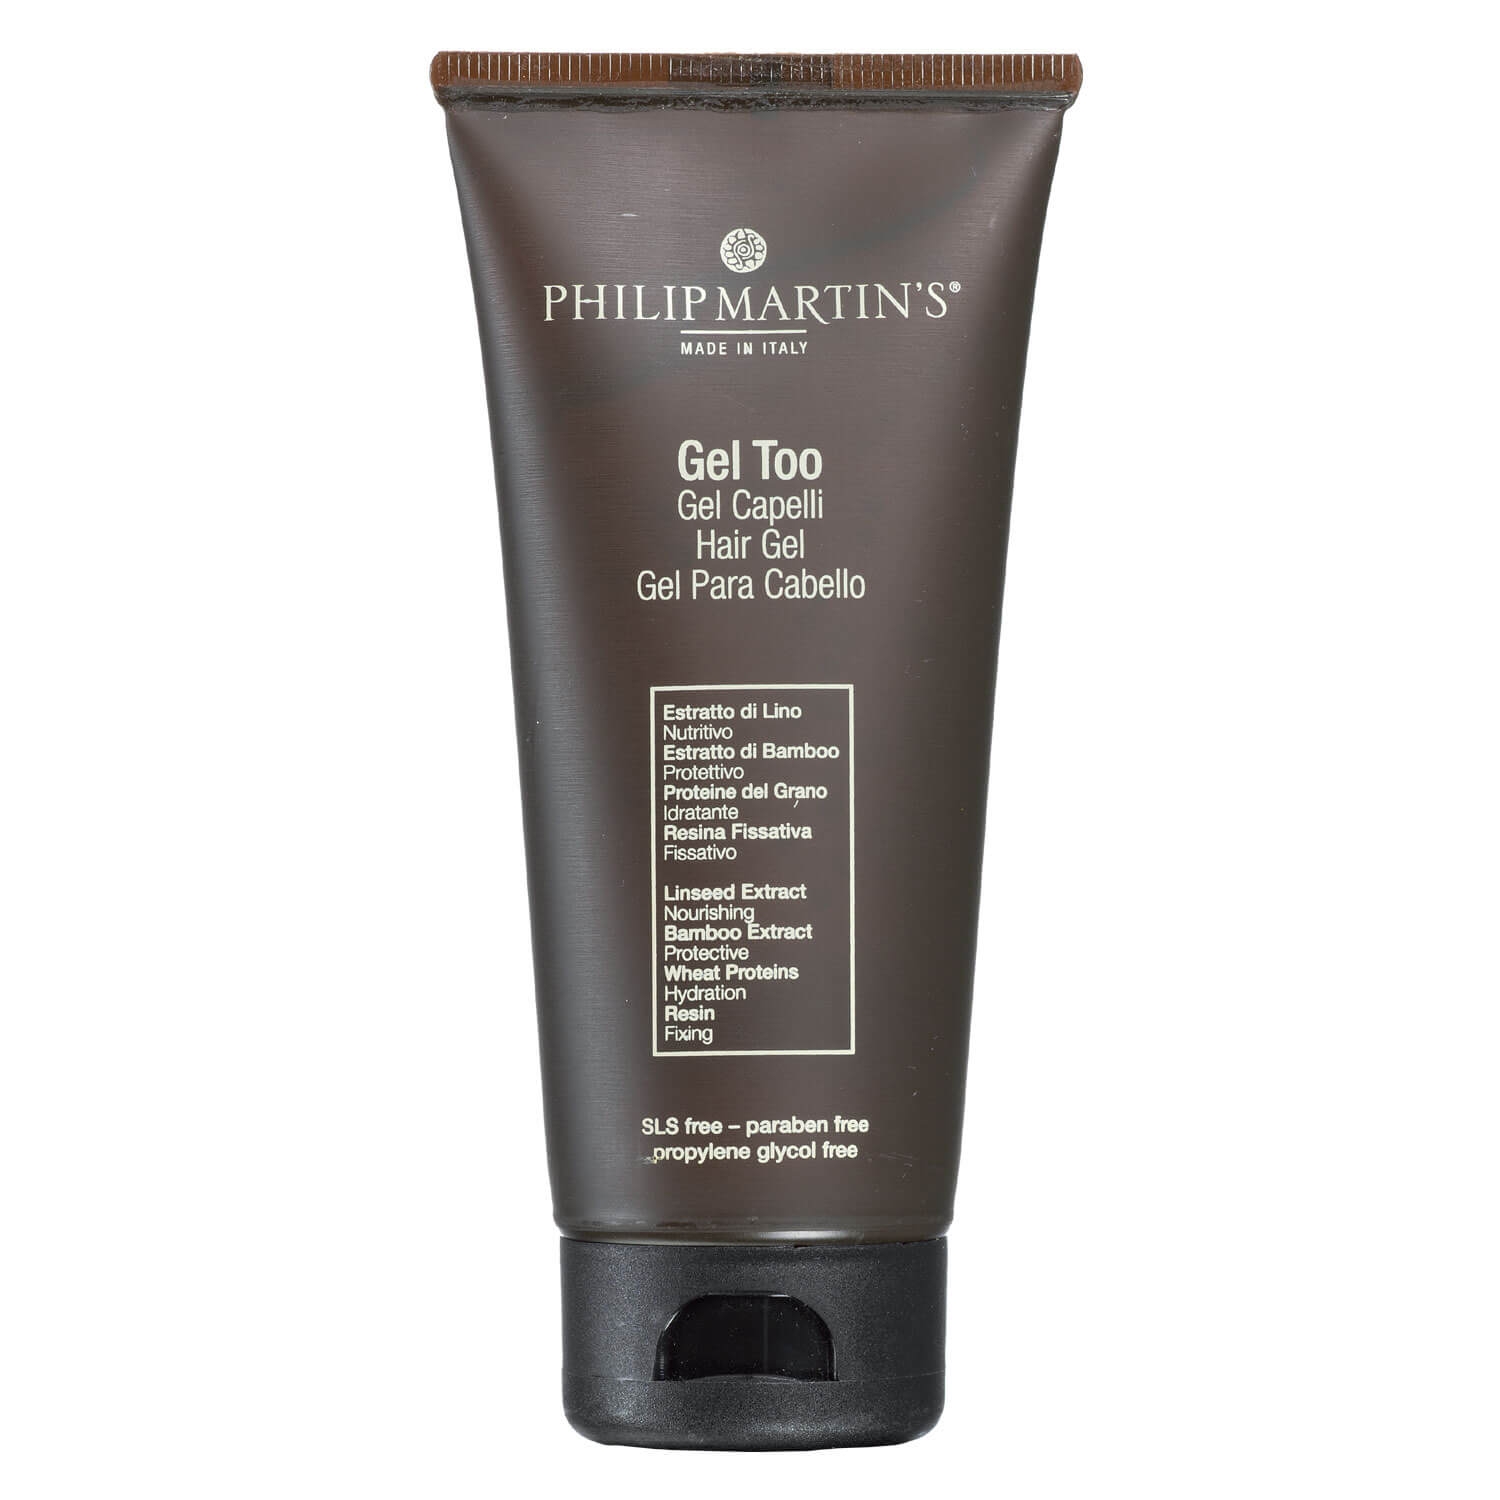 Product image from Philip Martin's - Gel Too